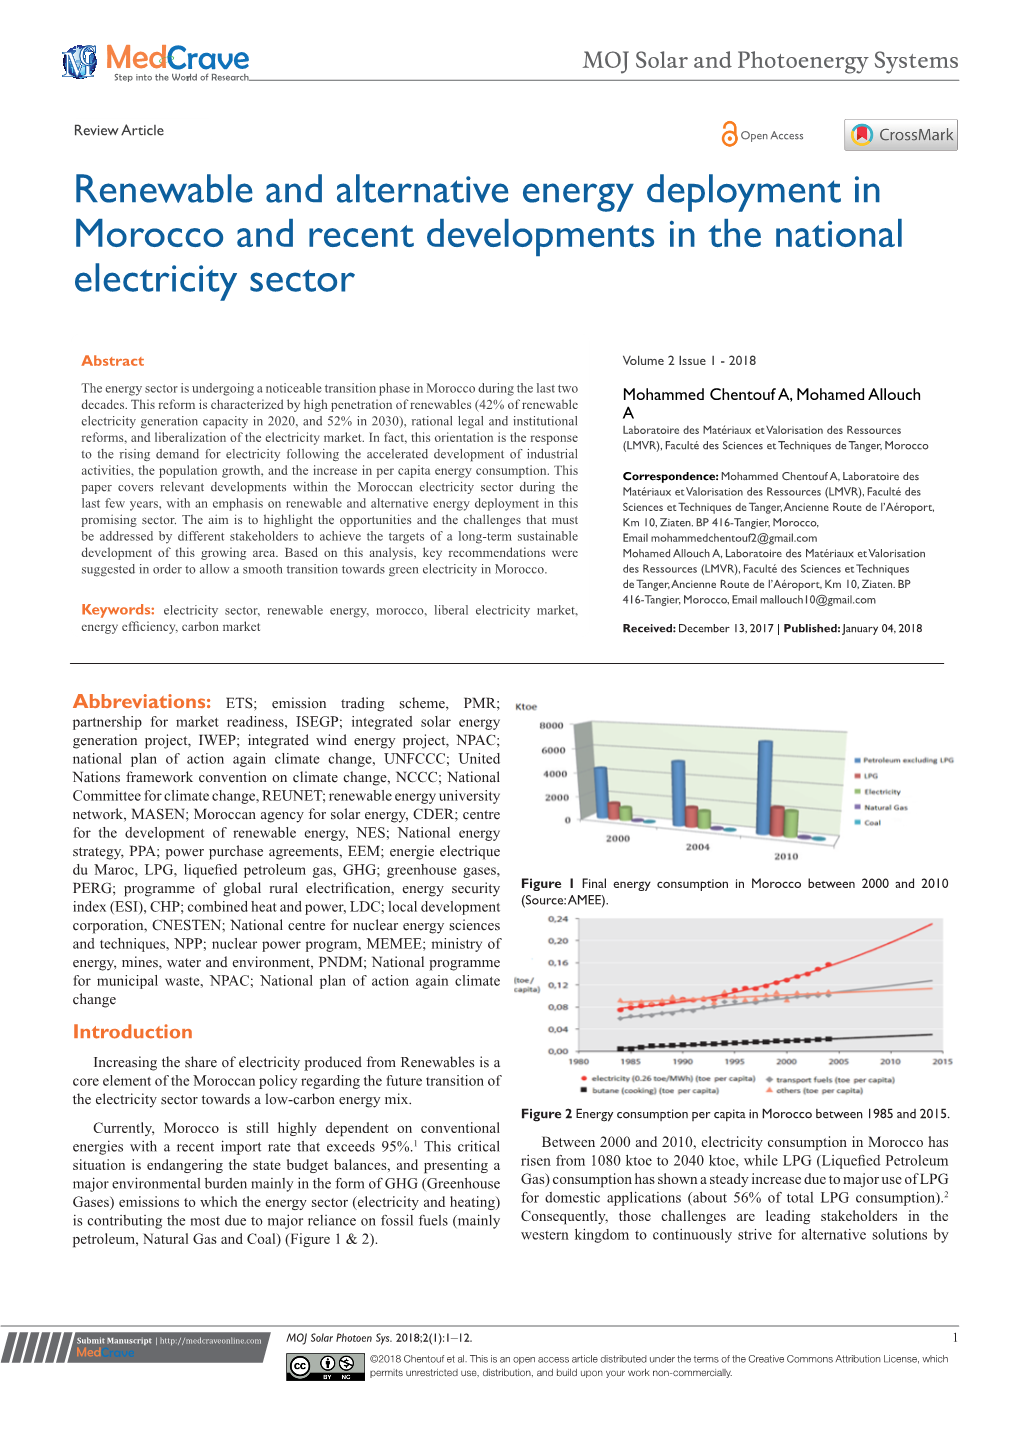 Renewable and Alternative Energy Deployment in Morocco and Recent Developments in the National Electricity Sector